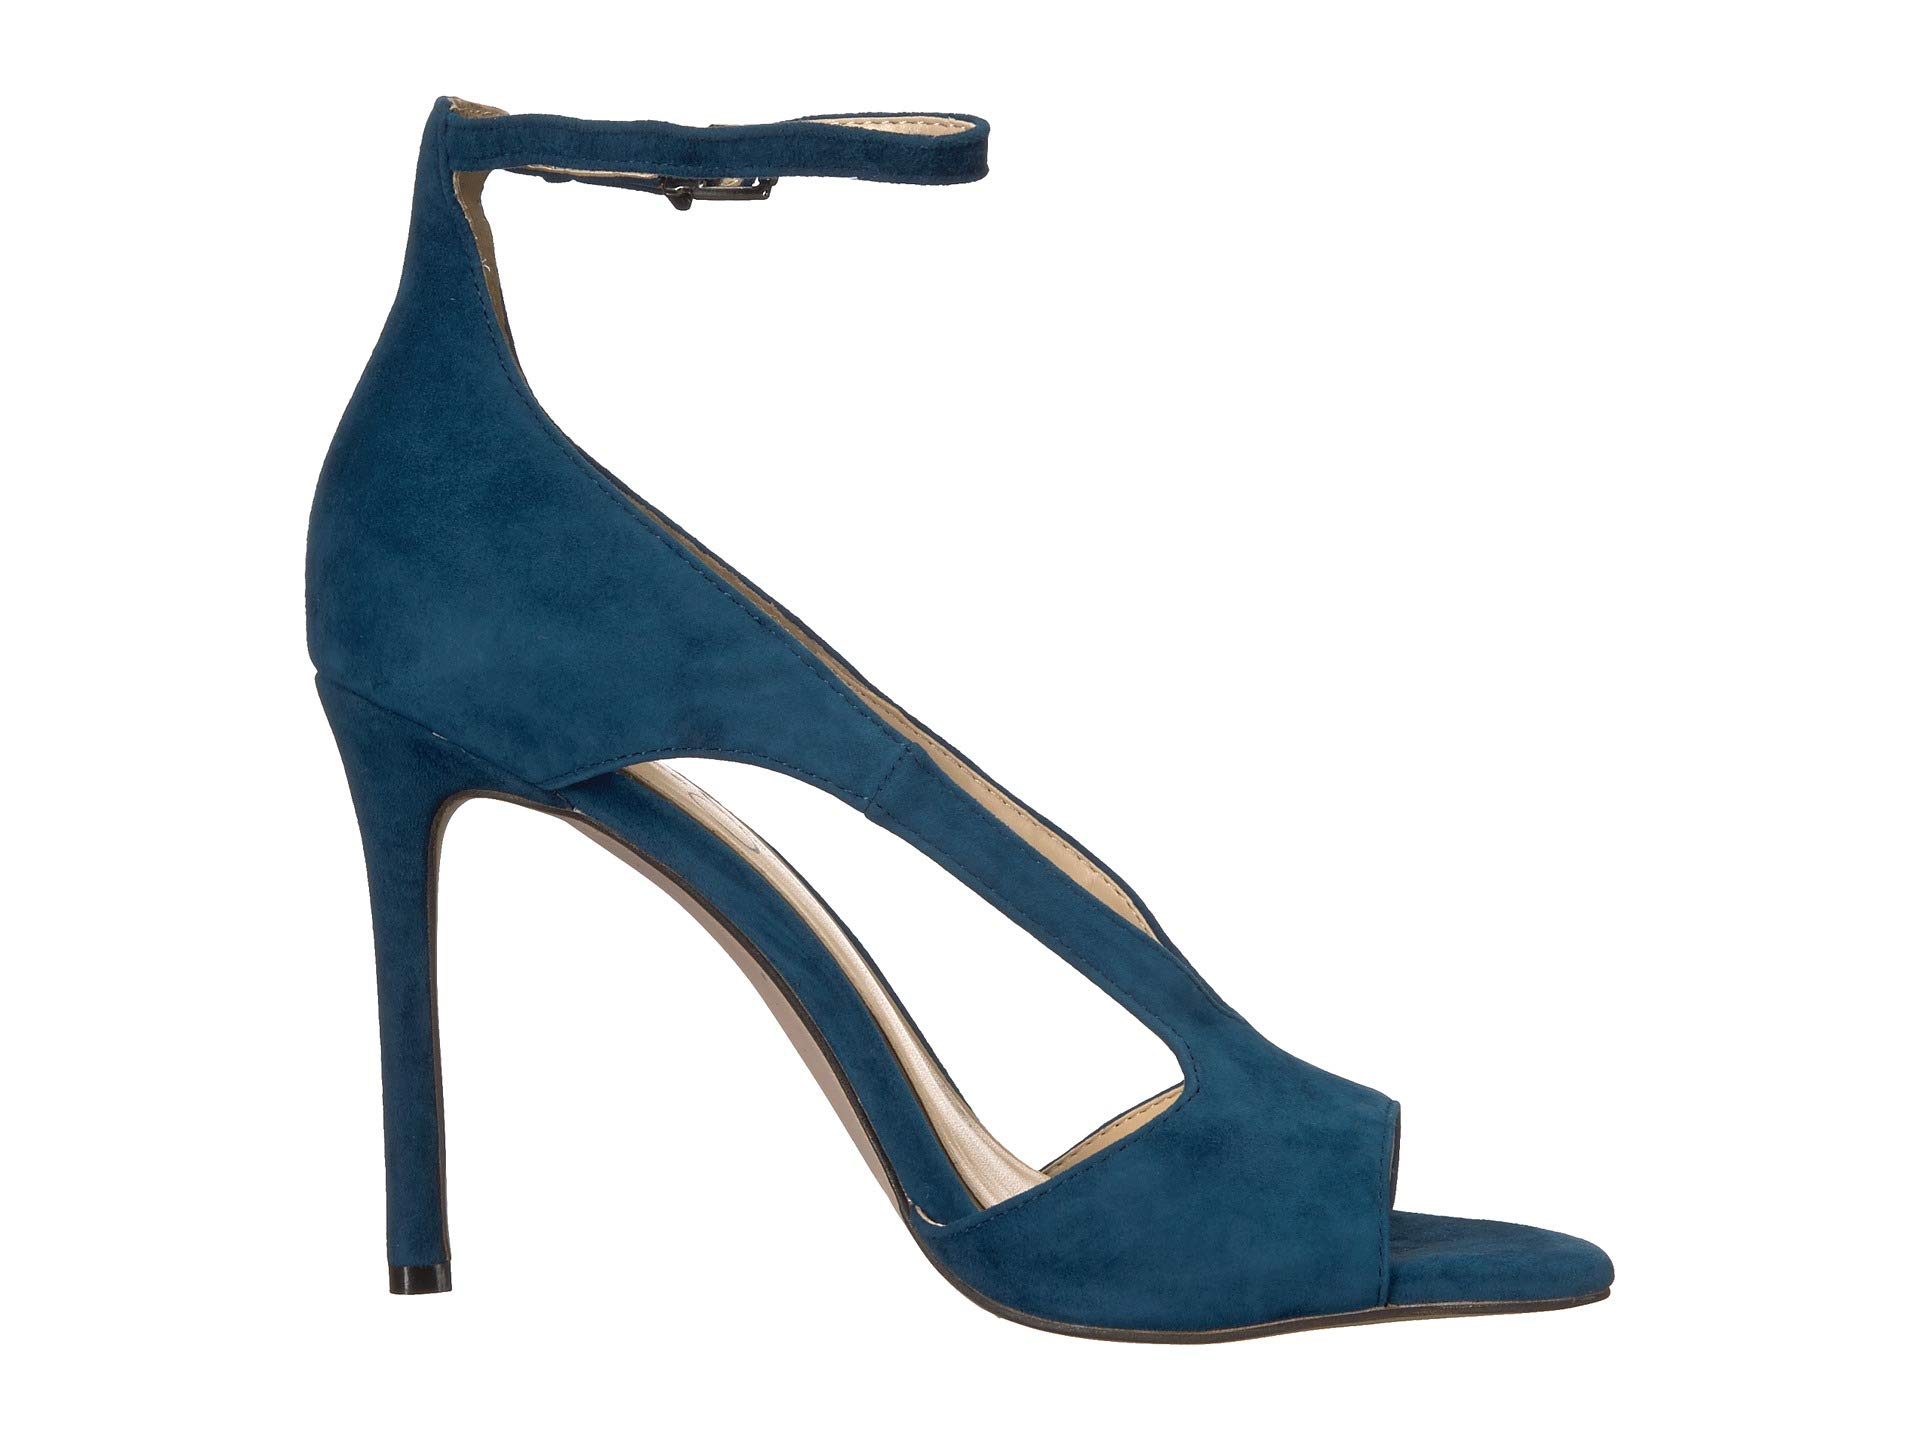 Jessica Simpson Women's Jasta Suede Azurite Ankle-High Leather Pump - 5.5M - image 2 of 5